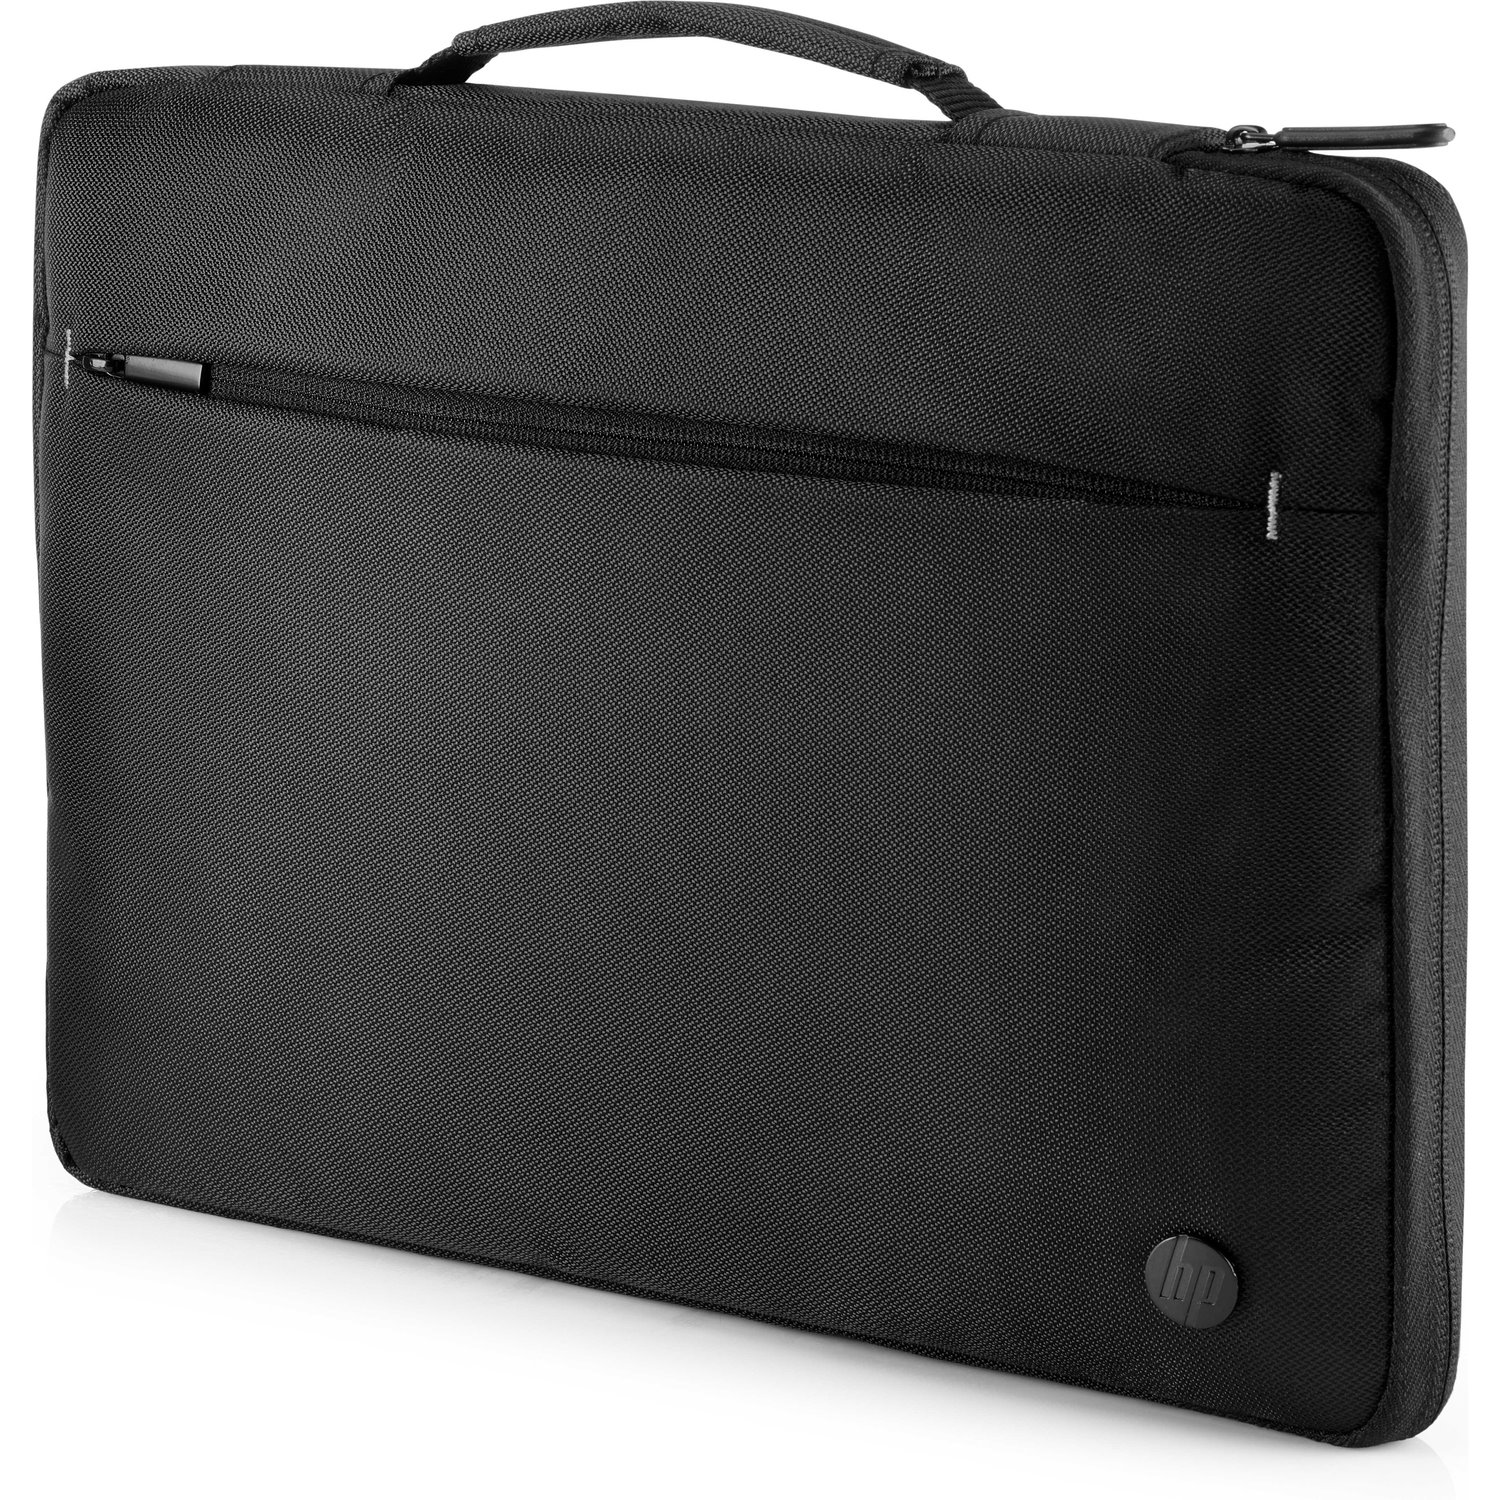 HP Business Carrying Case (Sleeve) for 35.8 cm (14.1") Notebook - Black